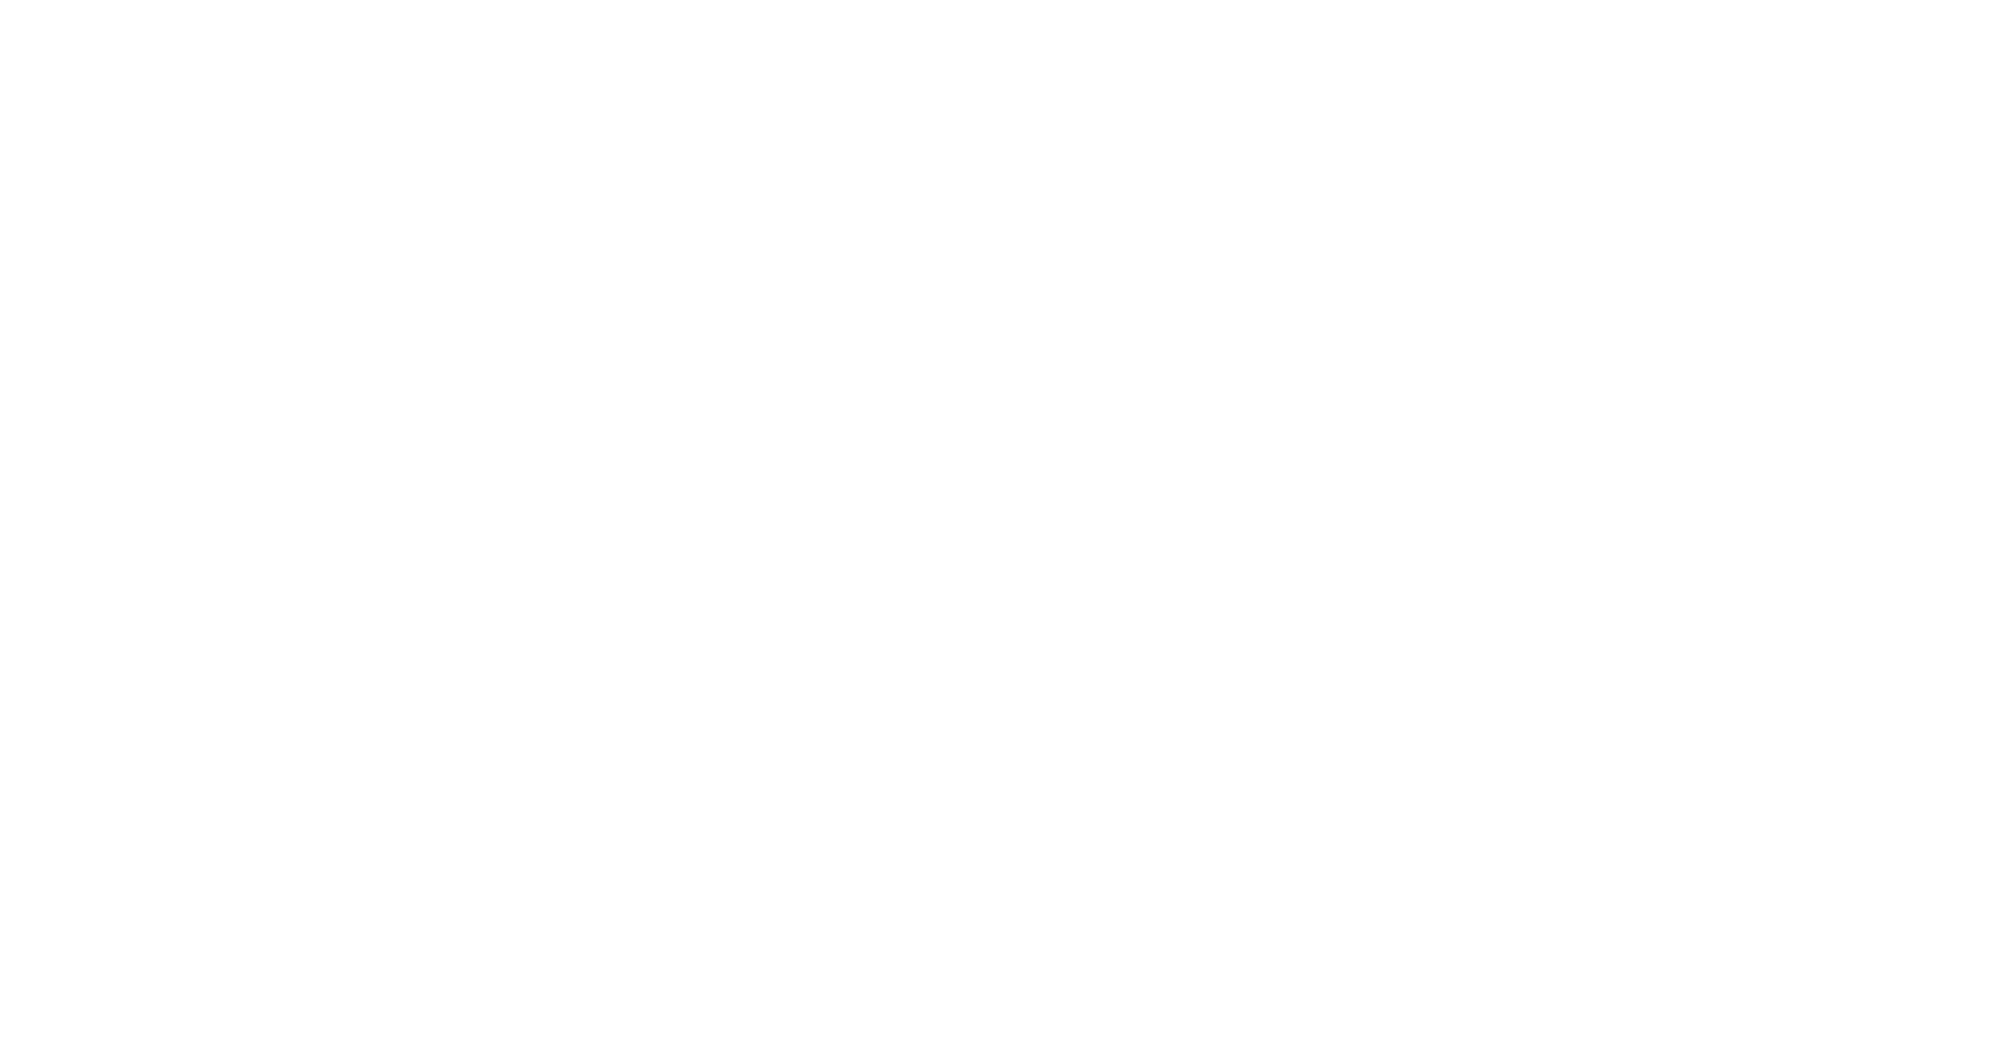 Concentric circles representing the action of an echo